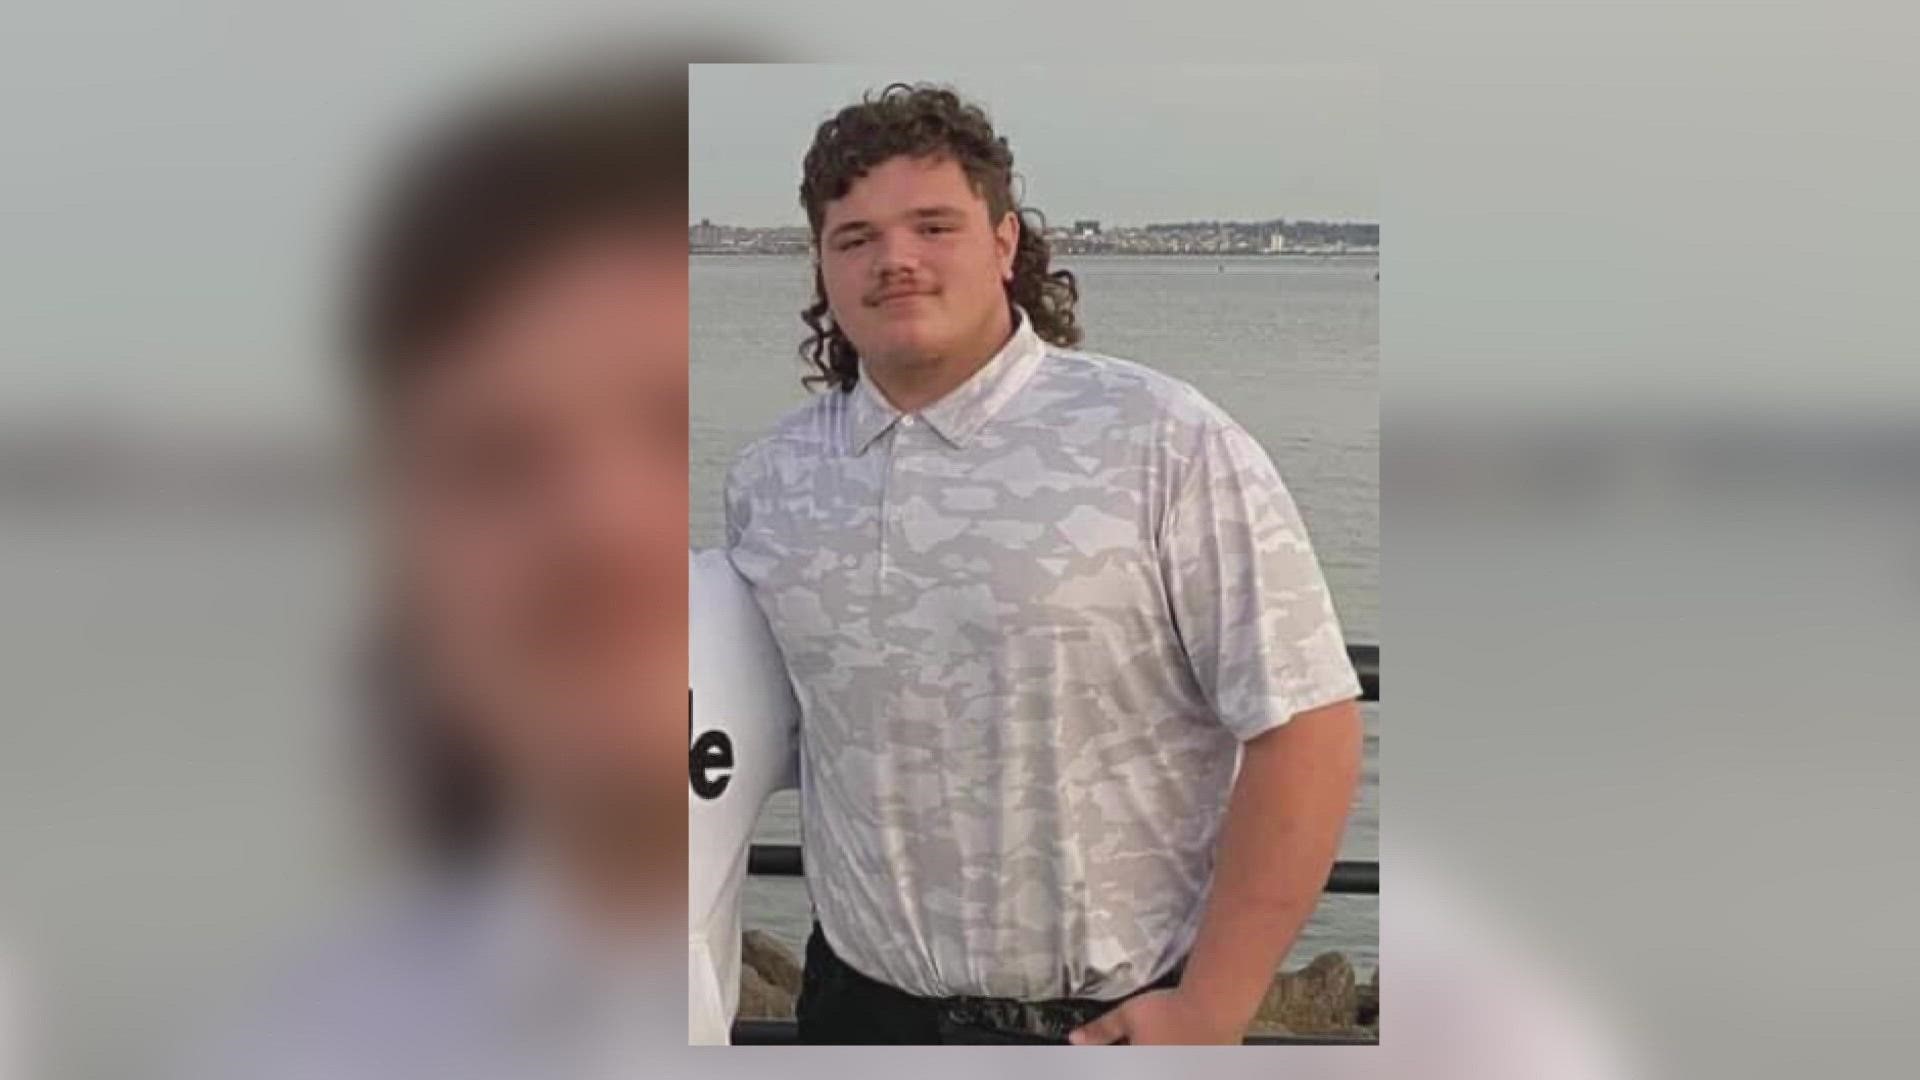 18-year-old Gavin Petro died early Sunday morning in a crash in Tipton County that also killed his cousin, 17-year-old Adam Johnson of Kokomo.